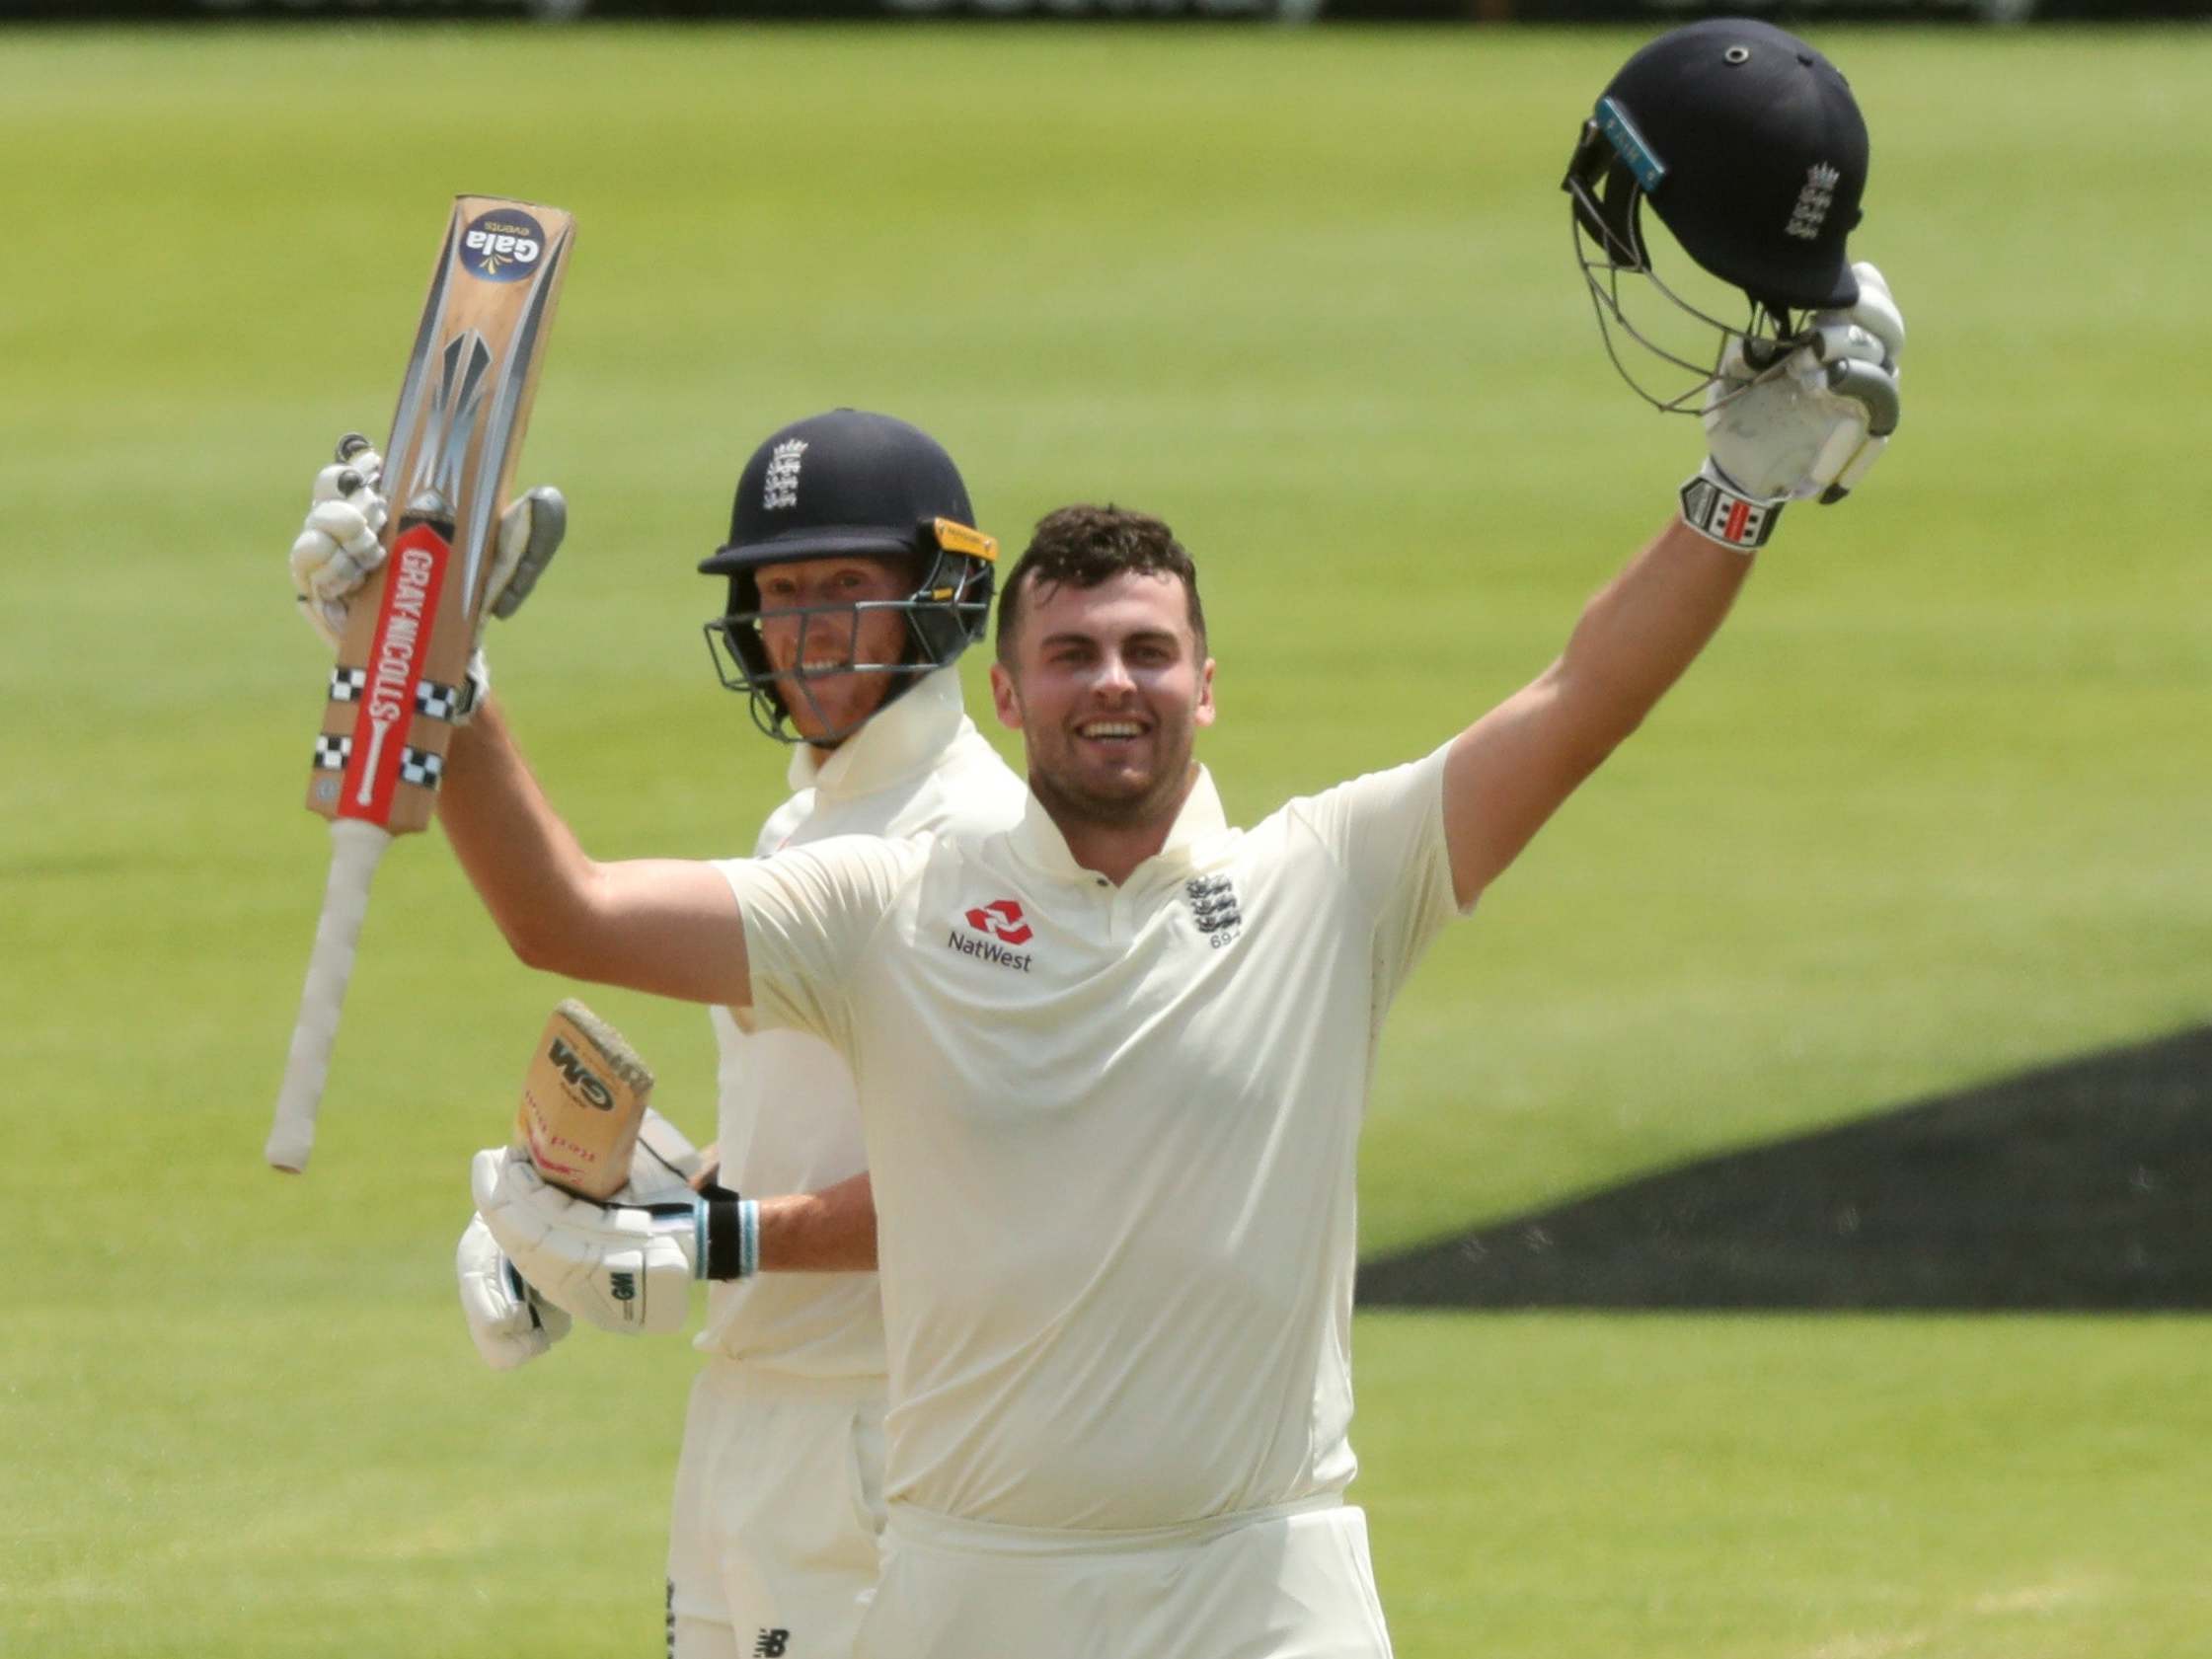 Sibley made three figures for the first time as England tightened their grip on the second Test